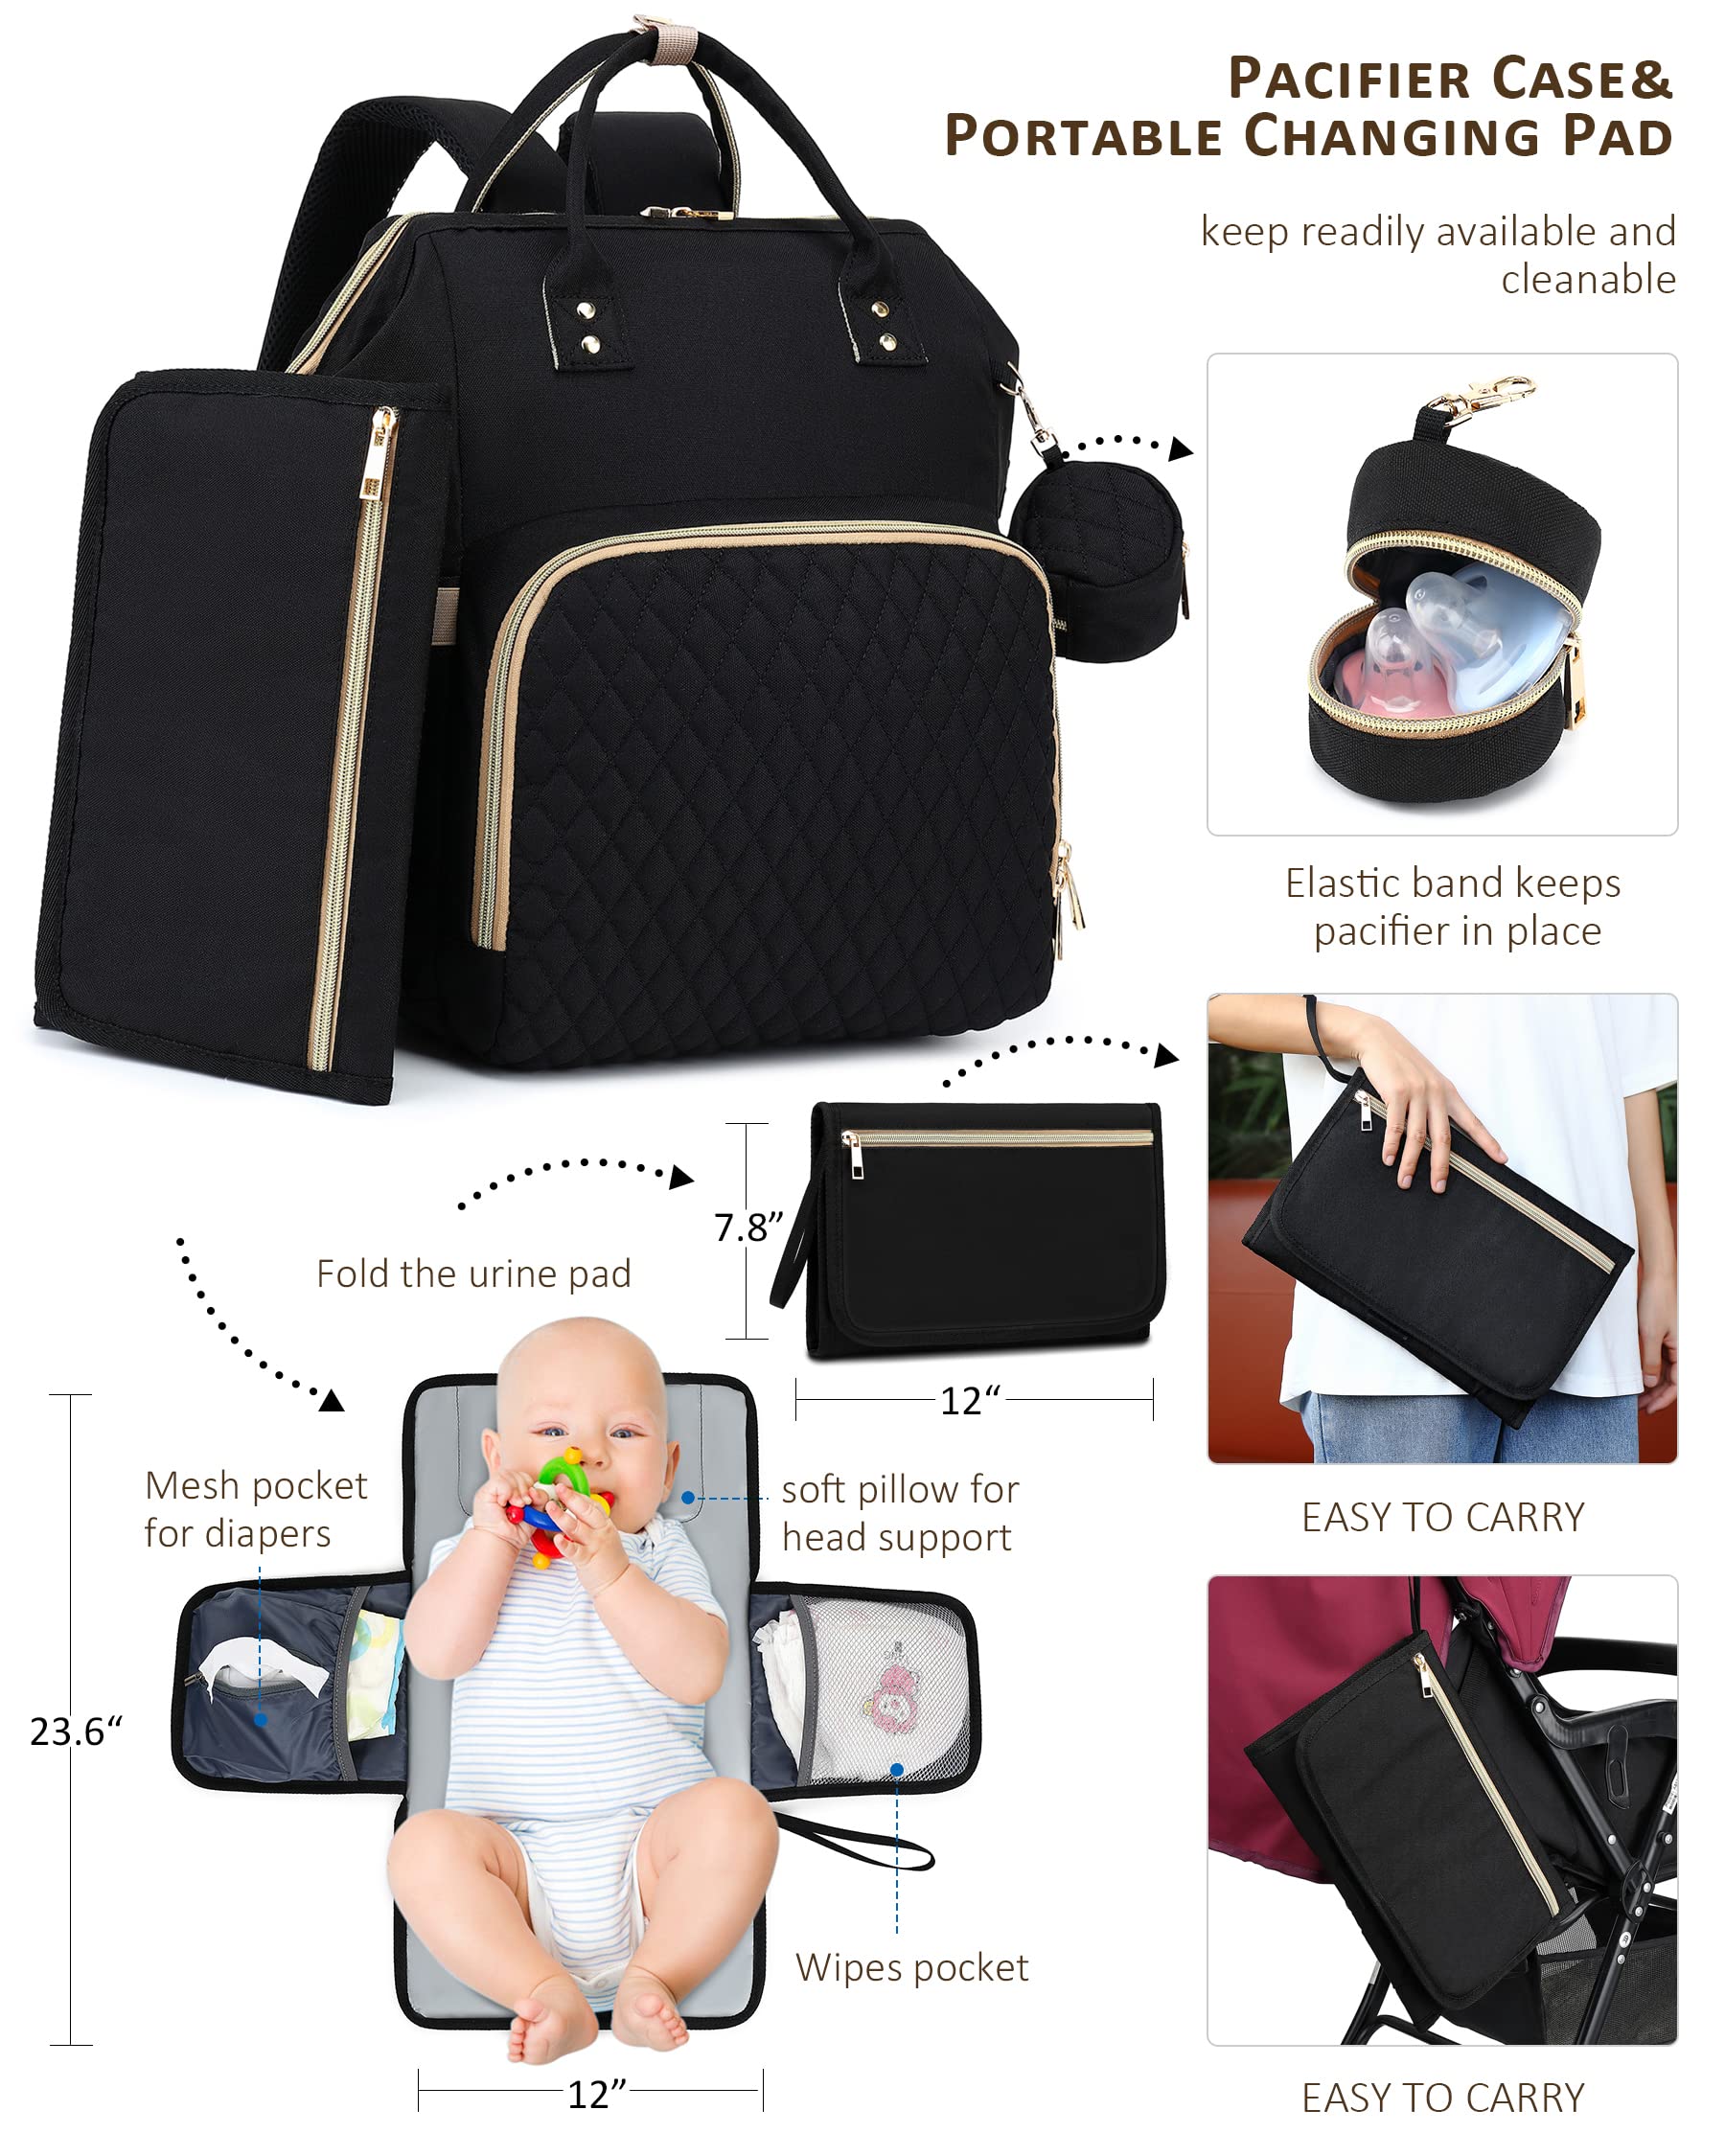 Diaper Backpack with Changing Pad, Pacifier Case - Black Diaper Bags for Girl Boy Newborn Unisex Infant Toddler - Travel Bag for Mom Dad - Registry Baby Shower Gifts, 30L Large Capacity